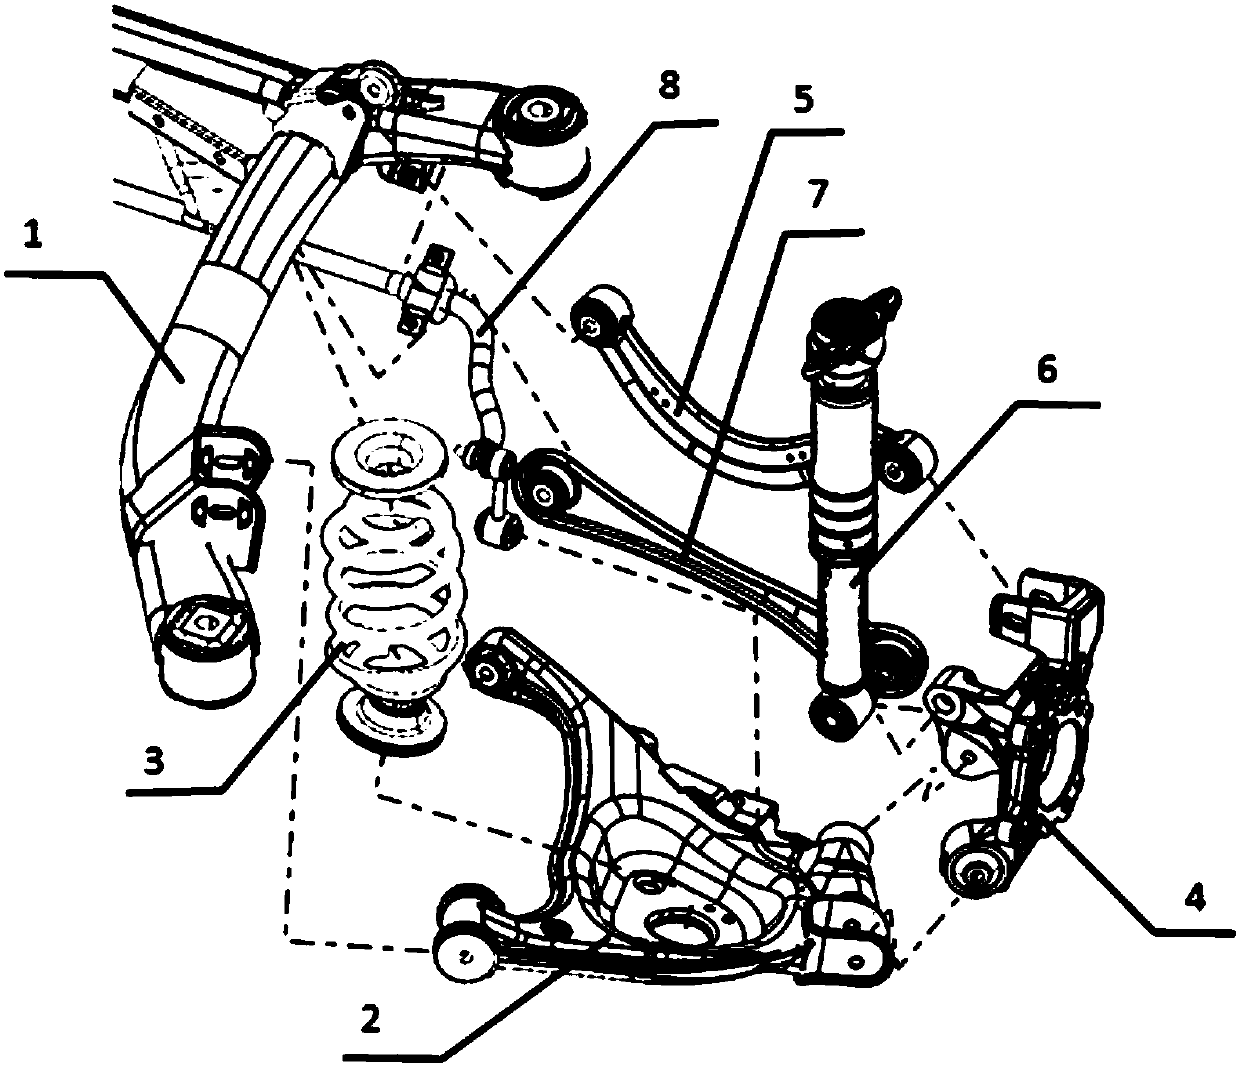 Rear independent suspension assembly